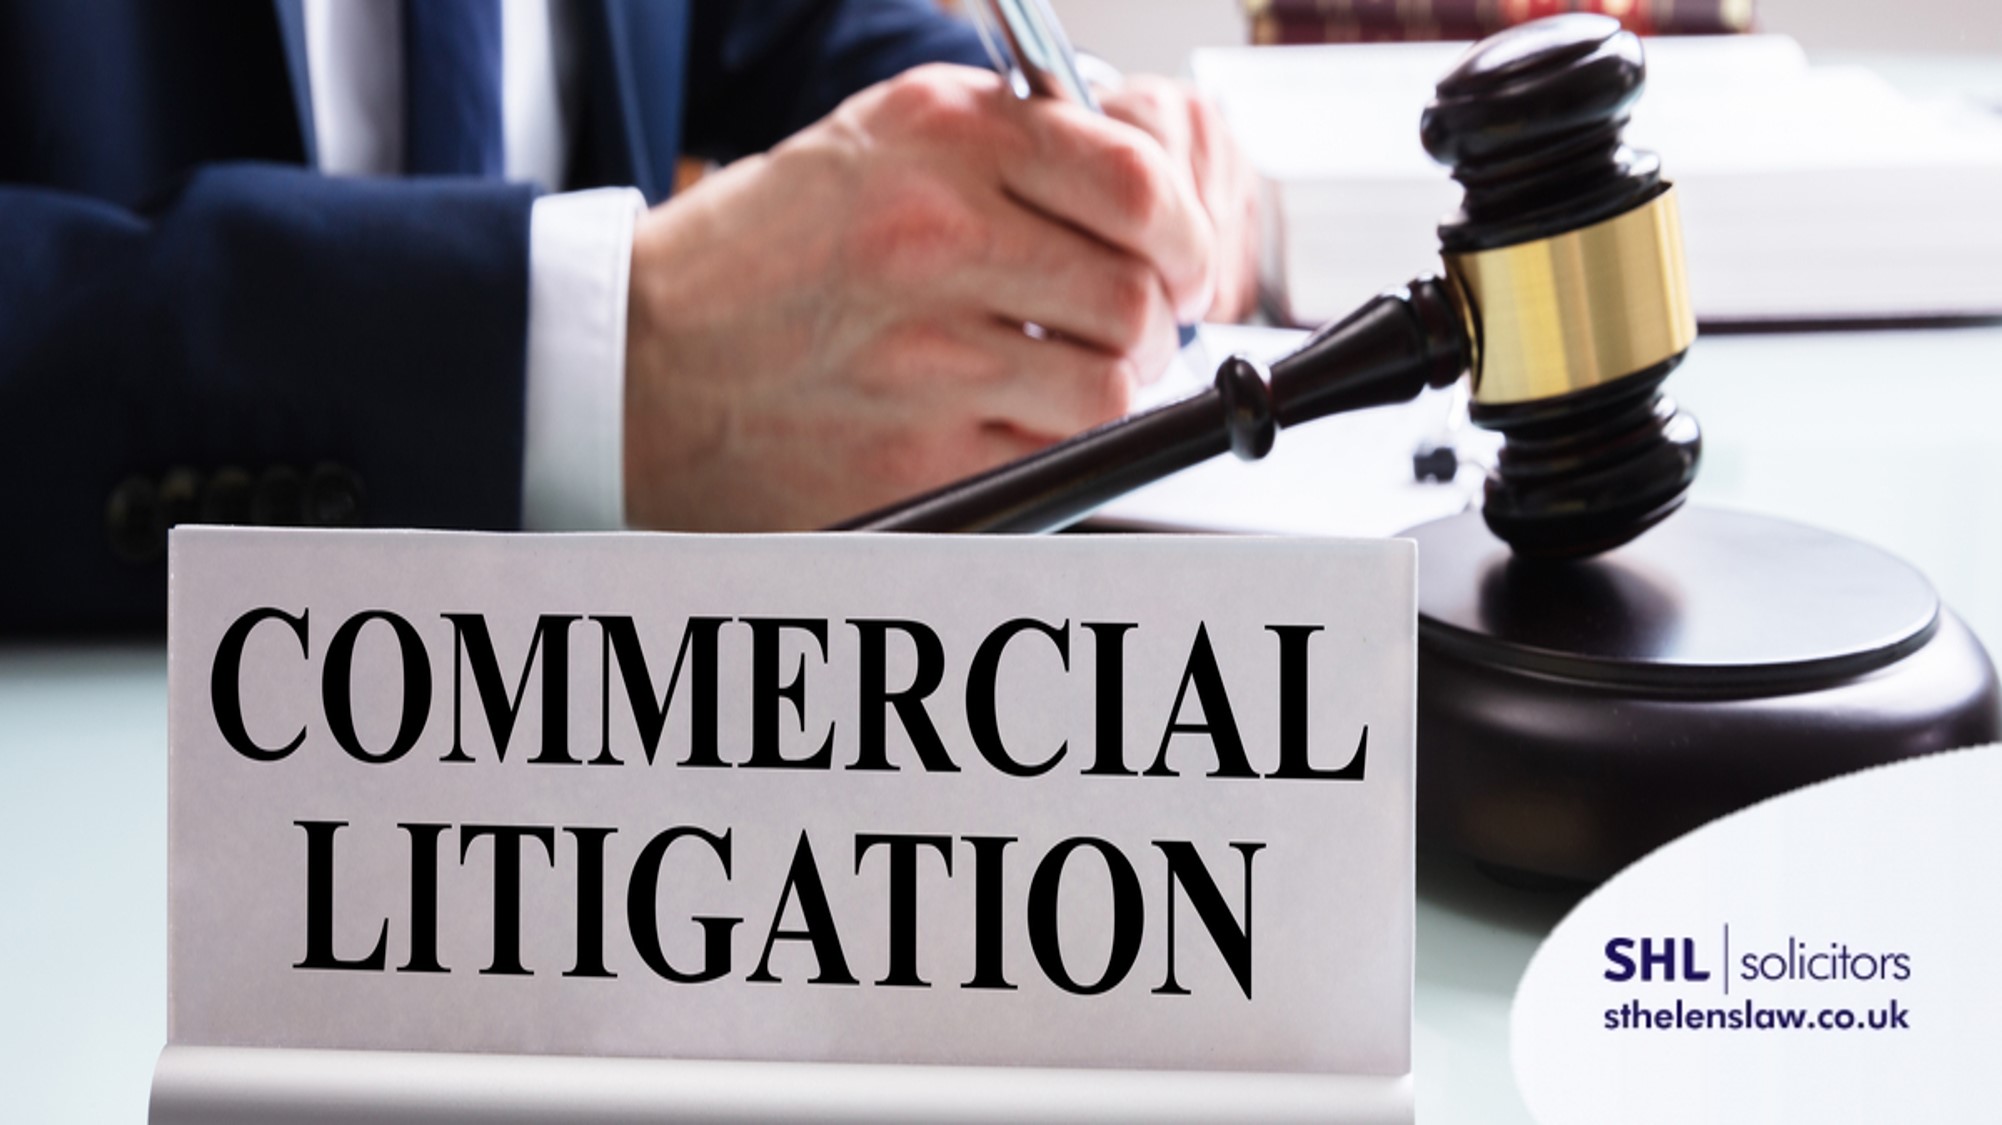 What is the difference between civil and commercial litigation